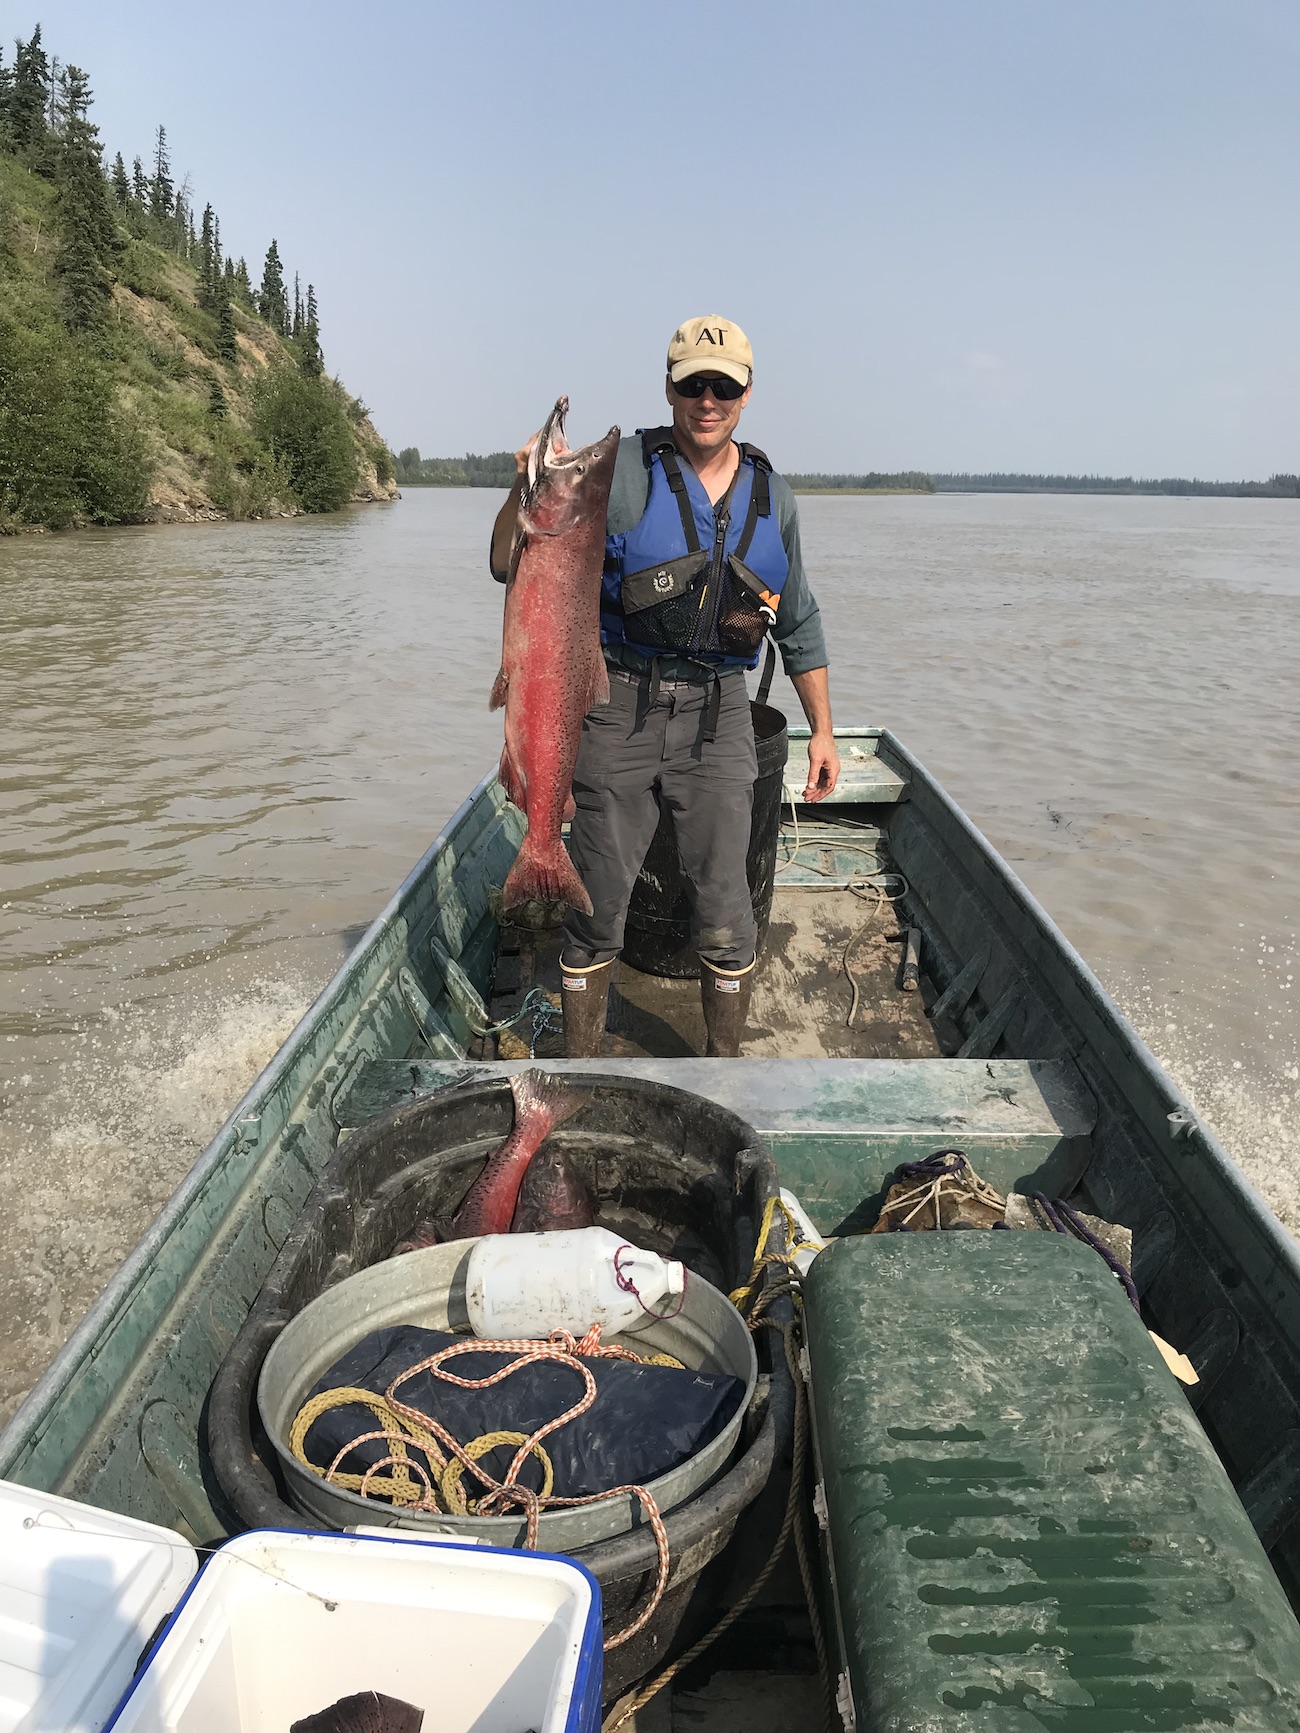 A man stands in a flat-bottomed boat full of coolers and tubs while holding up a red-colored salmon with one hand. The boat is traveling on a silty river, with a spruce-covered bluff and a low shoreline in the background, on a sunny day.